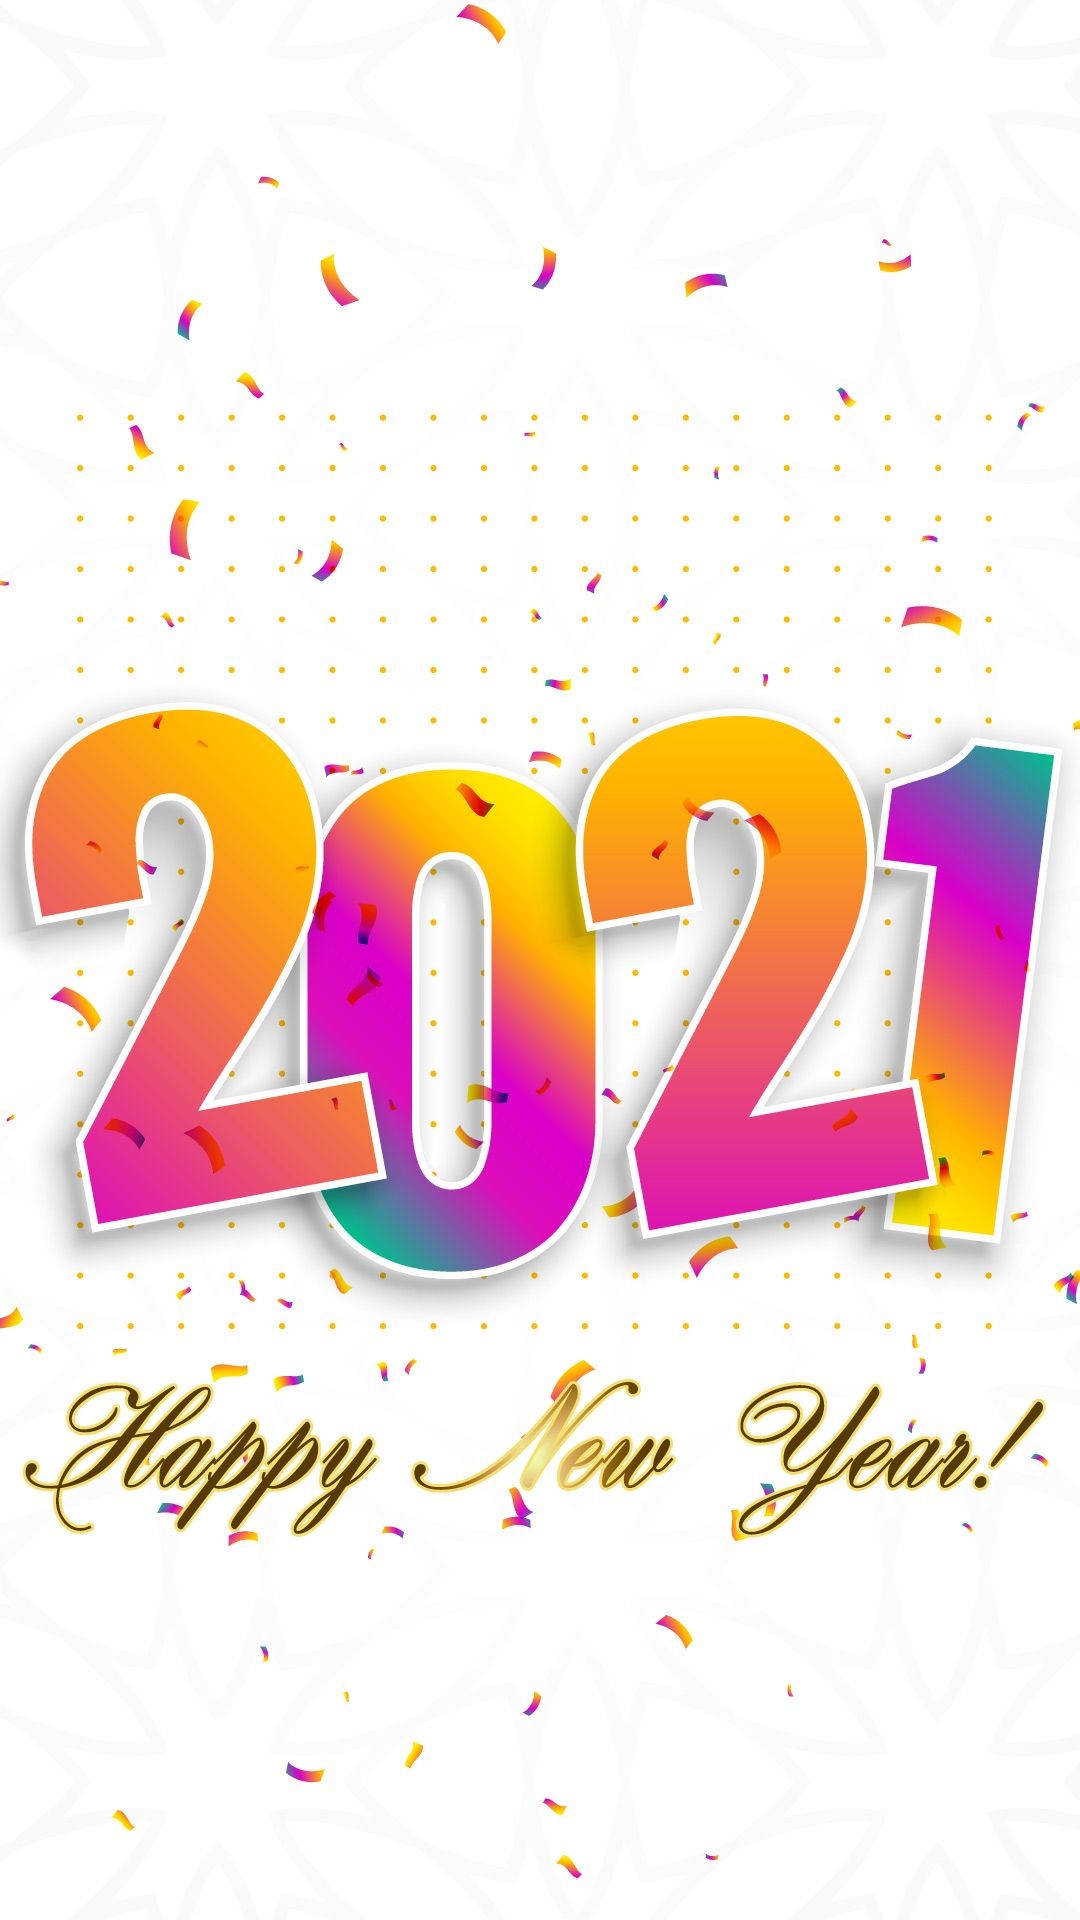 Wallpapers Phone Happy New Year 2021 with high-resolution 1080x1920 pixel. You can use this wallpaper for your Android backgrounds, Tablet, Samsung Screensavers, Mobile Phone Lock Screen and another Smartphones device